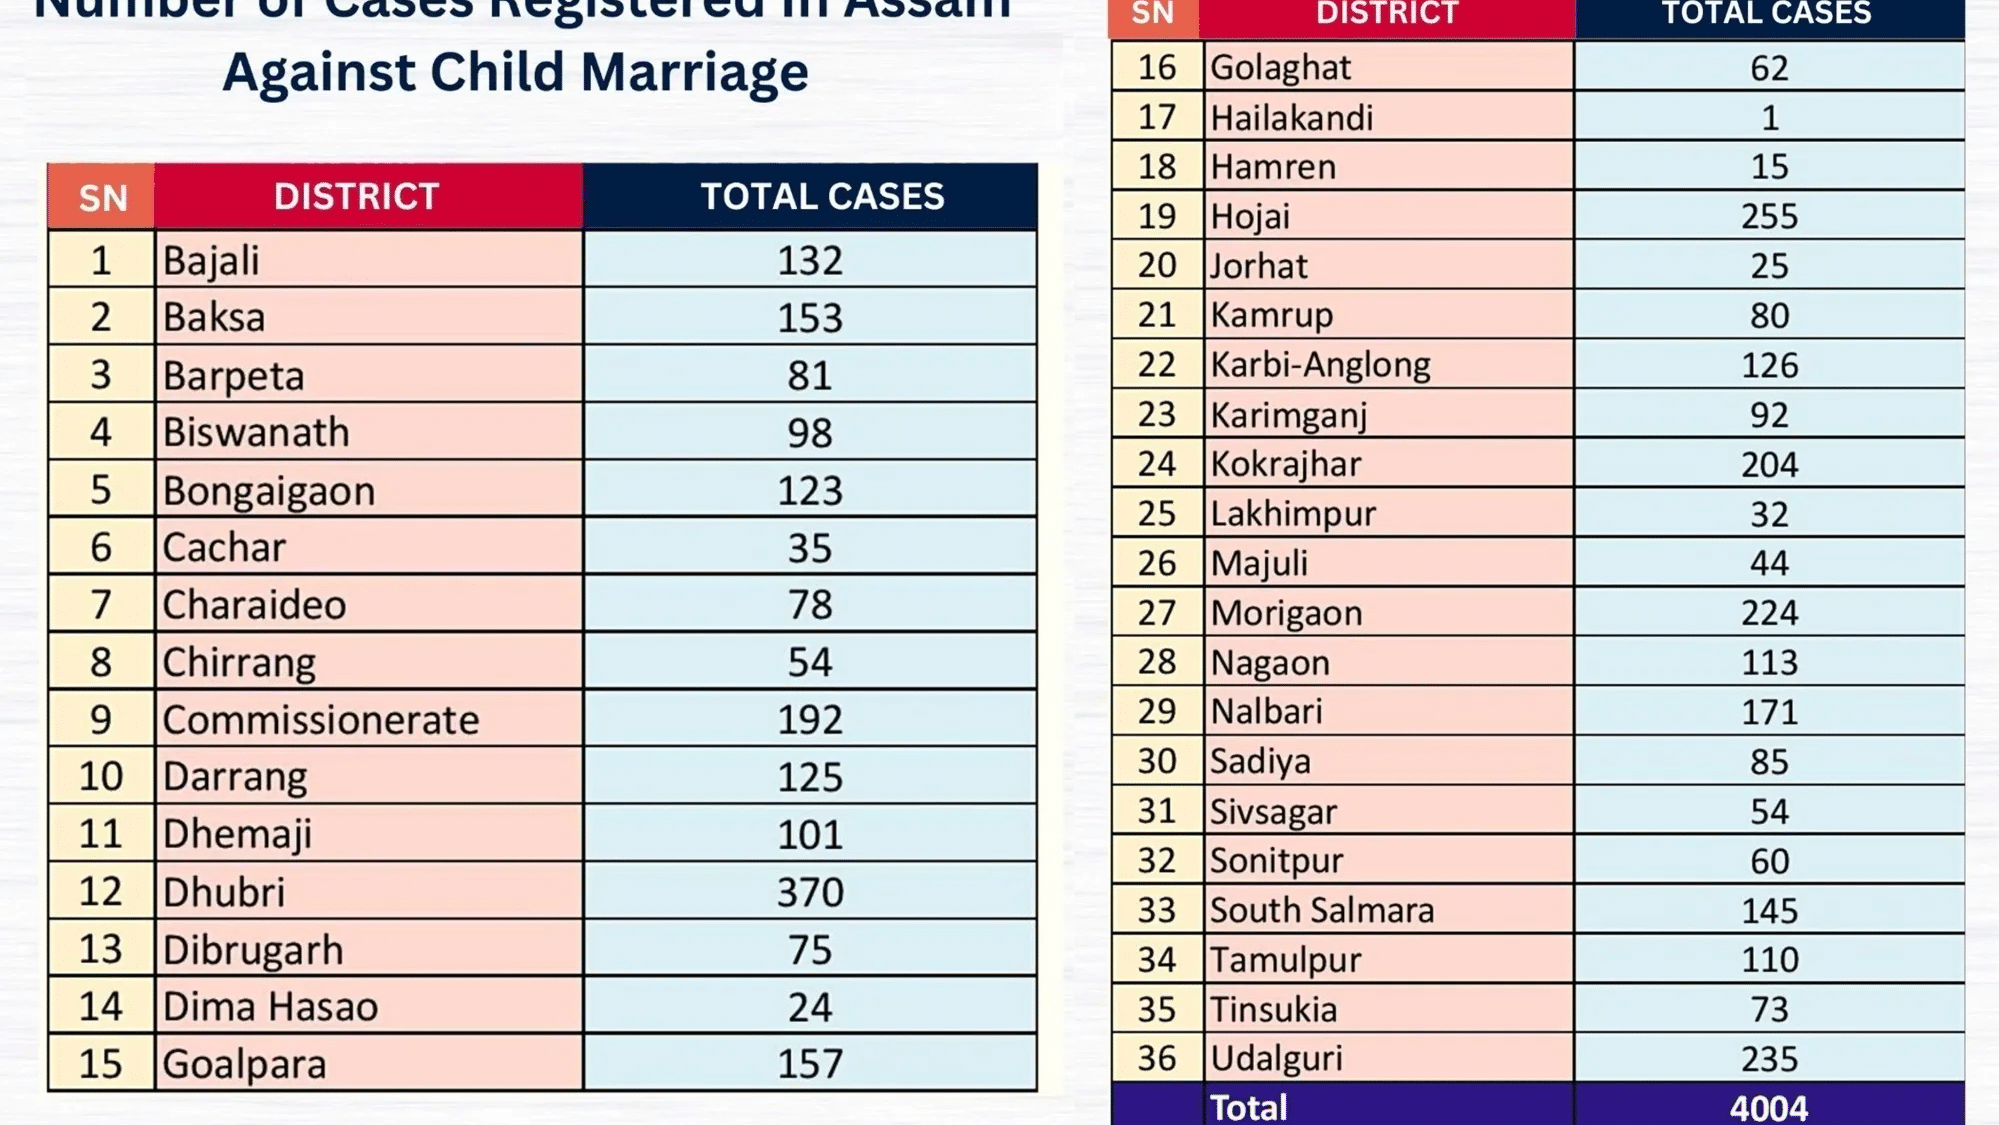 List of against child marriage in Assam